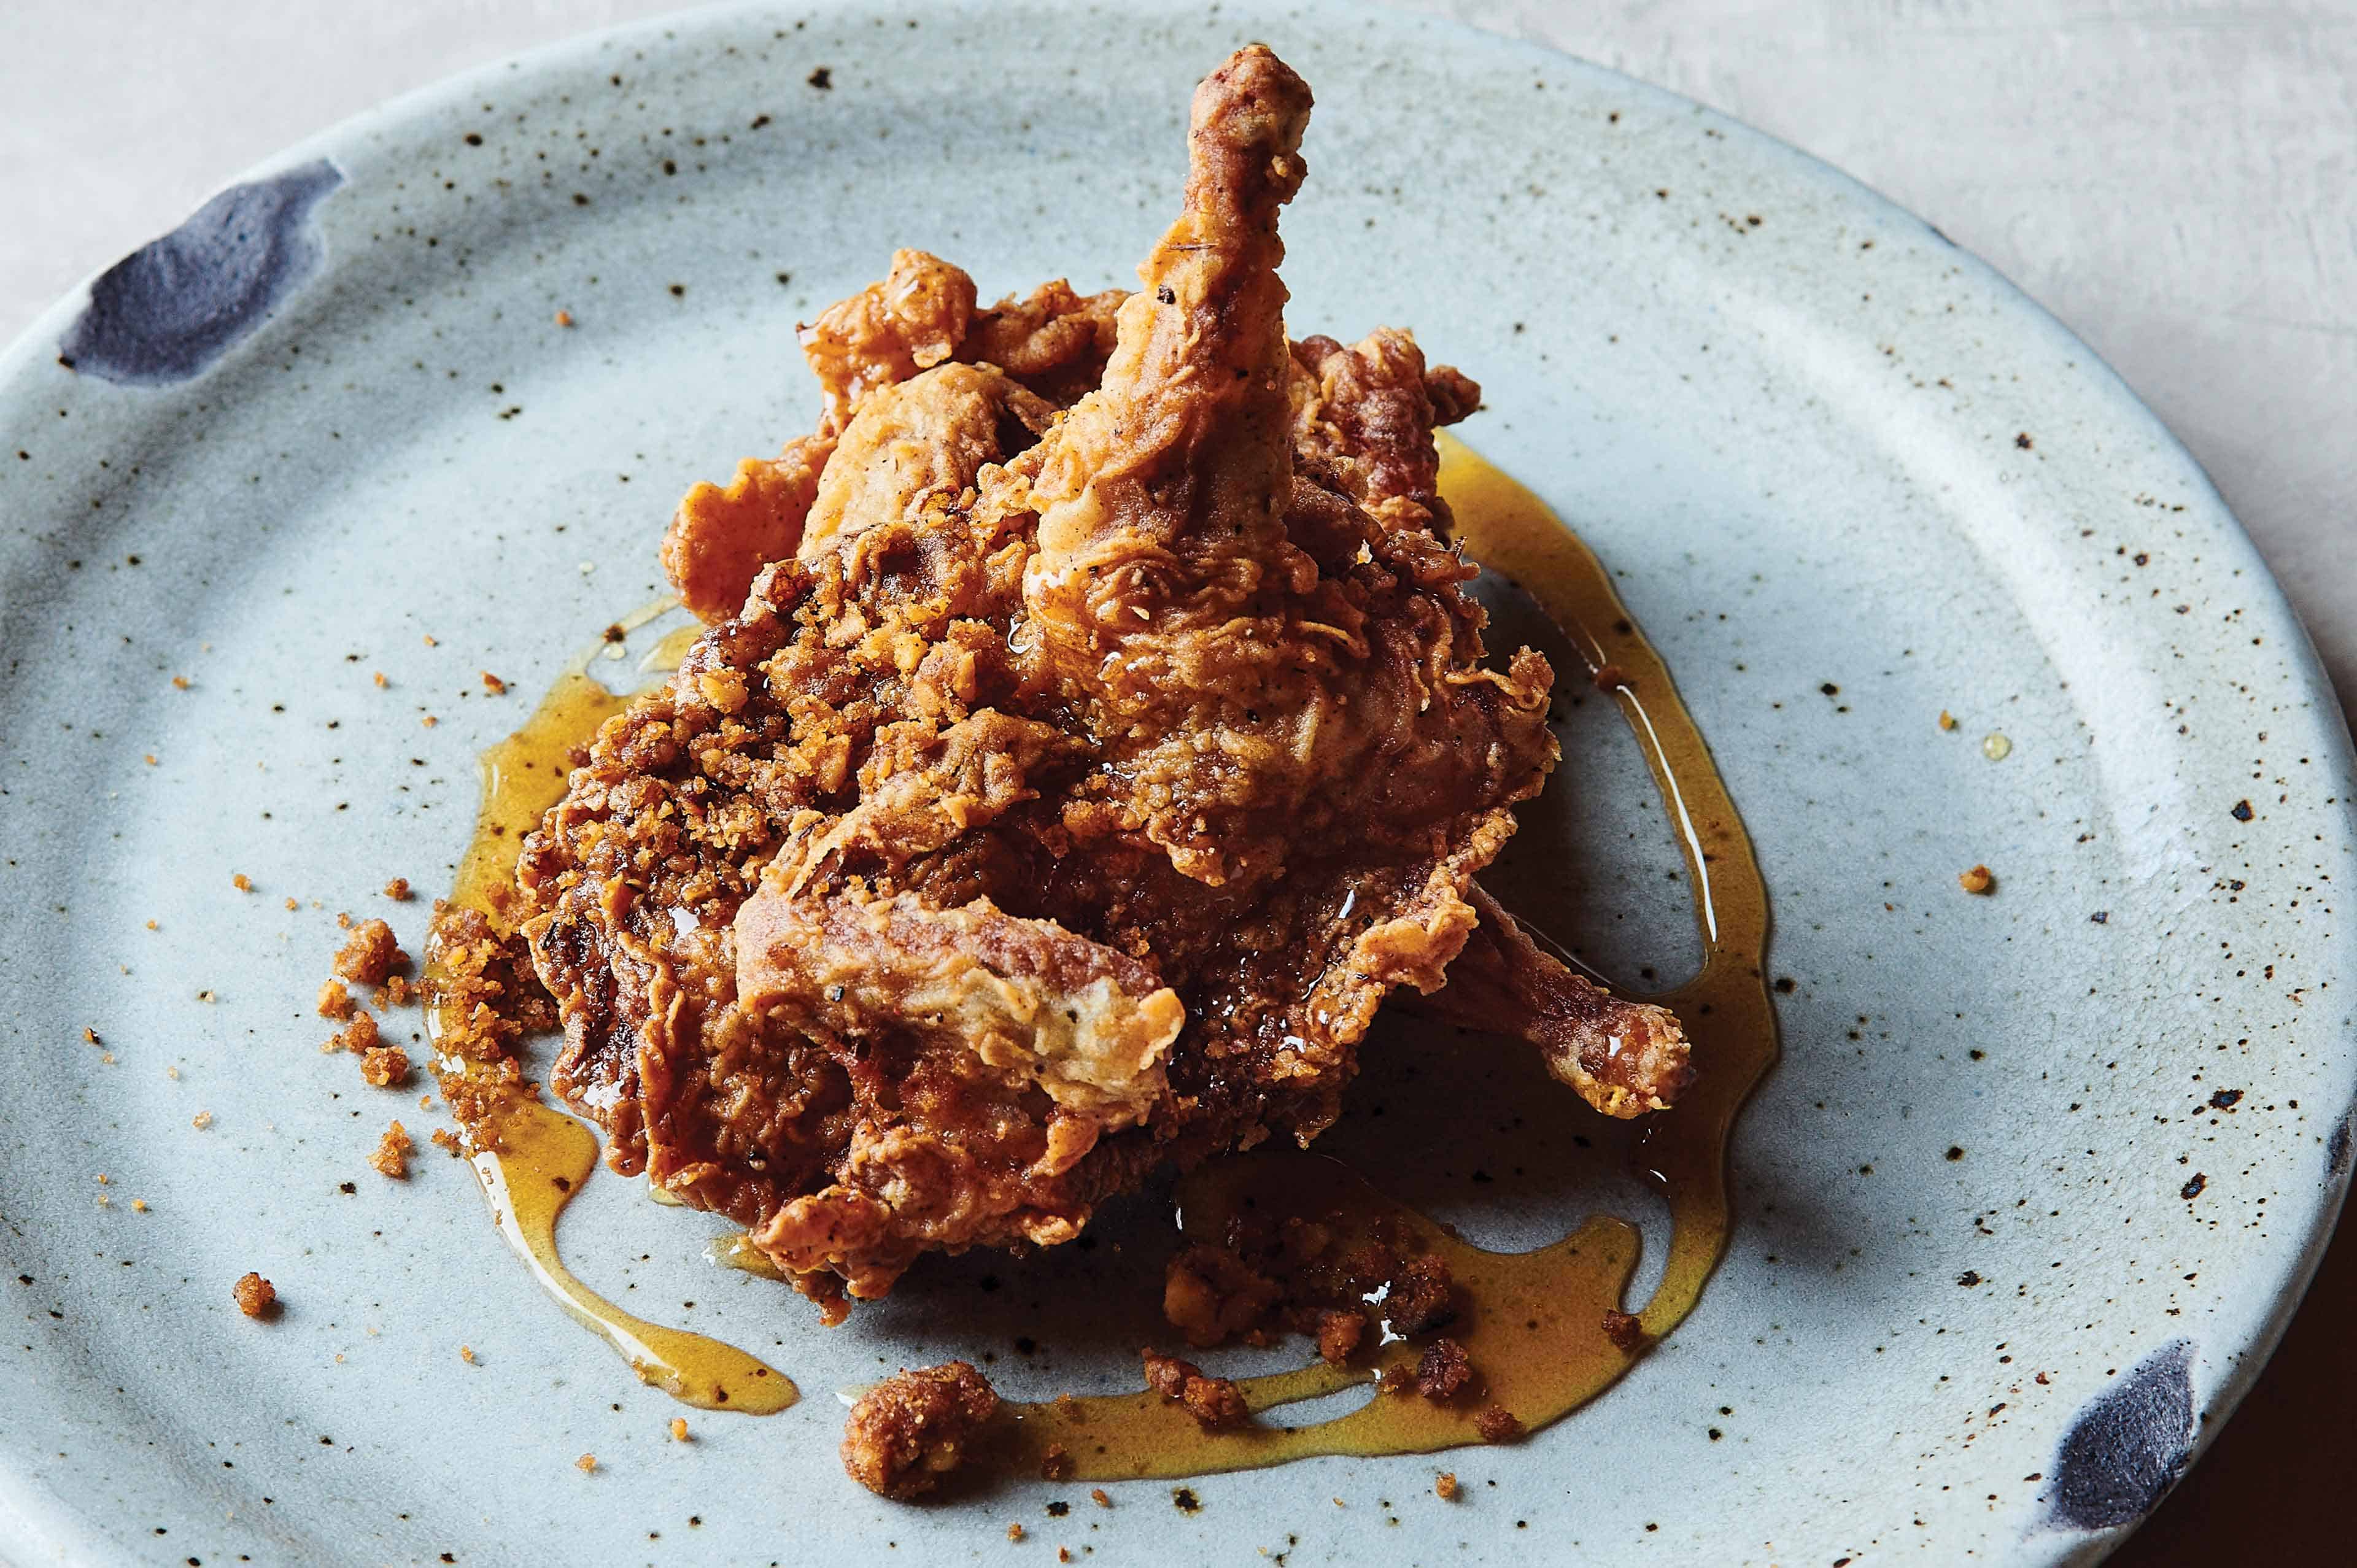 A mouthwatering fried quail recipe with honey hot suace.